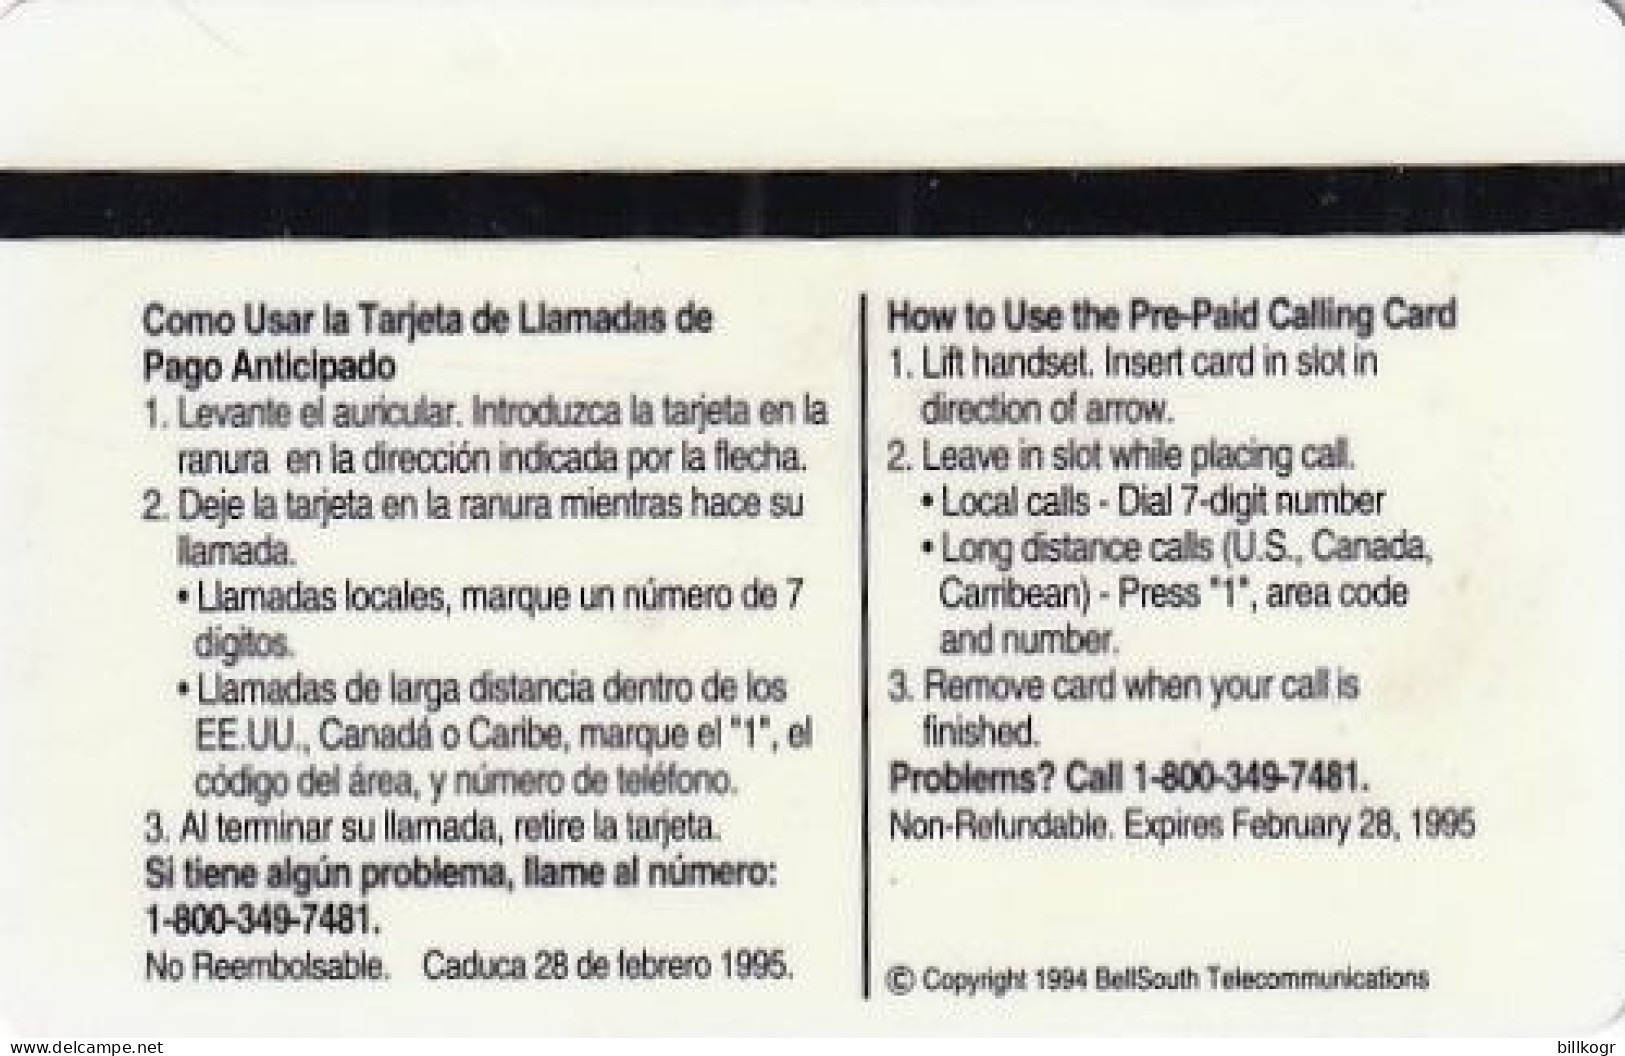 USA - Bellsouth Payphones, Bellsouth Trial Card, First Issue, Tirage 15000, 08/94, Mint - Cartes Magnétiques